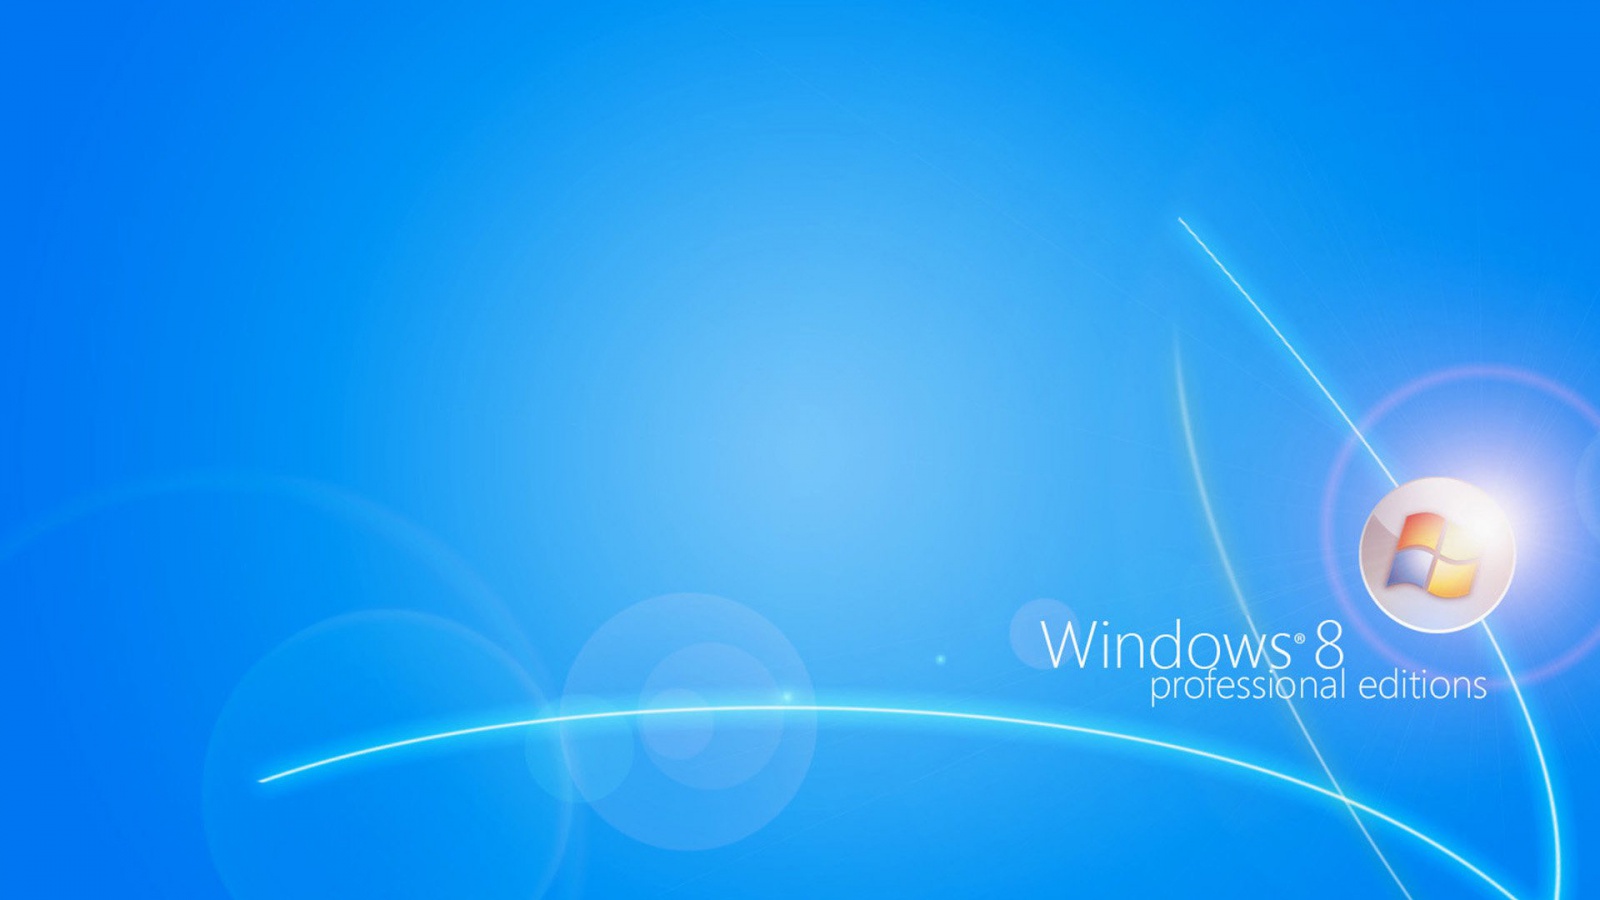 Windows Professional Edition Background In Resolution HD